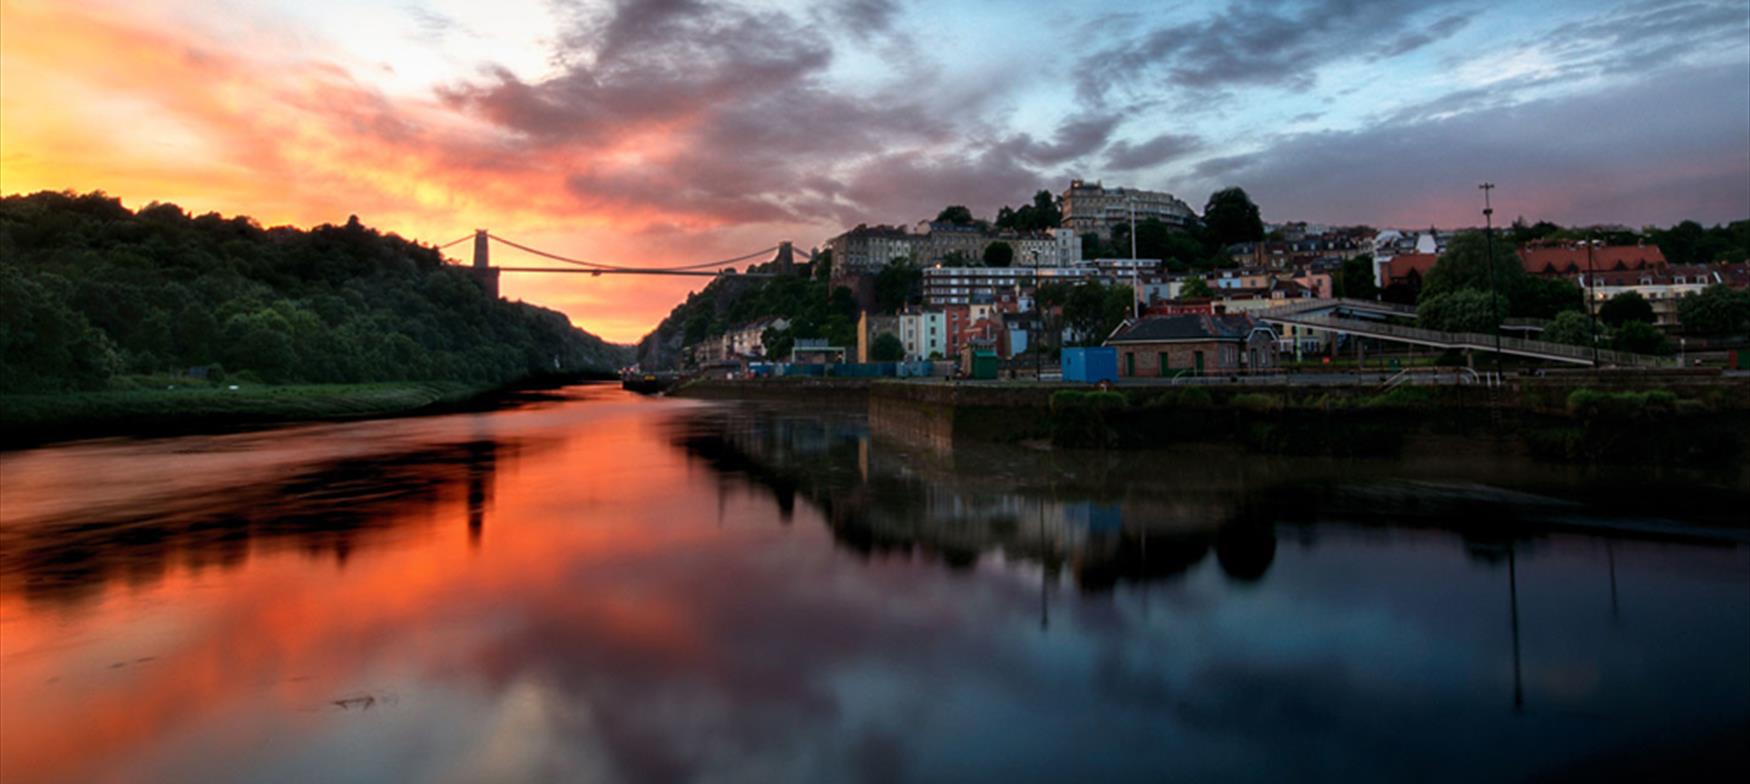 Places to Stay in Bristol